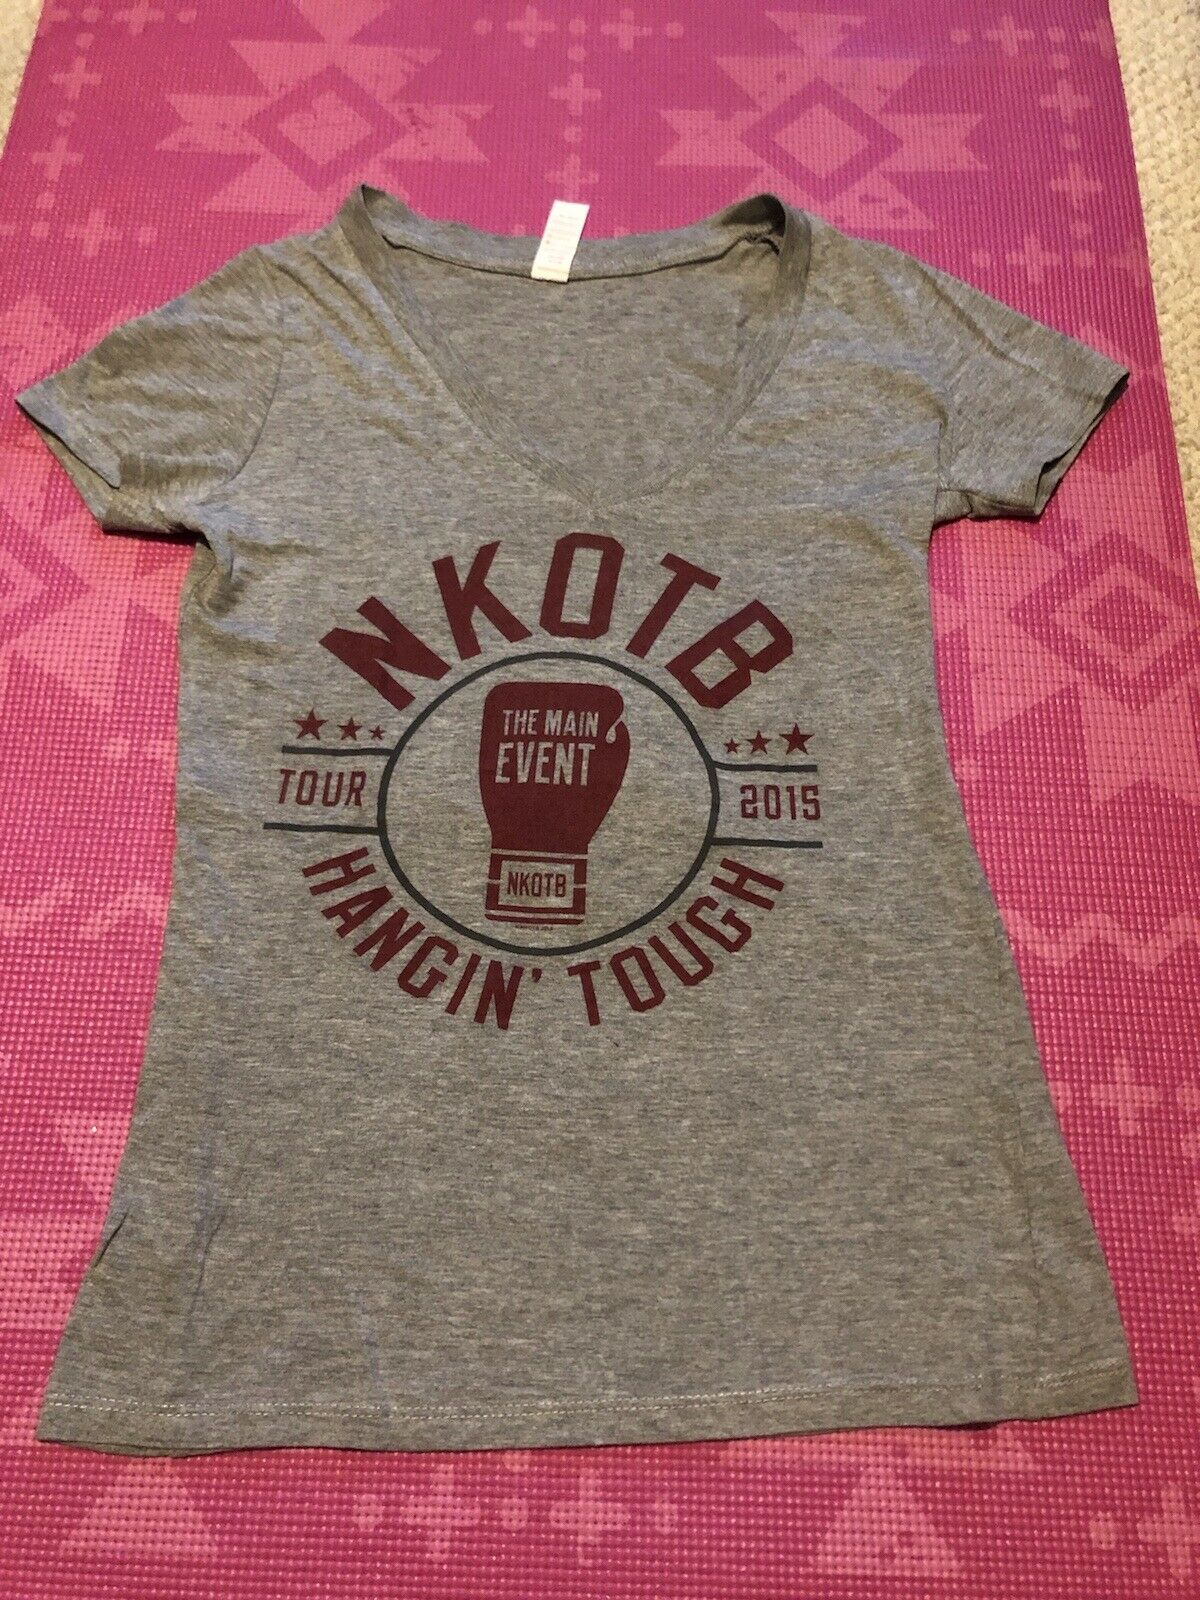 New Kids On The Block Nkotb Main Event Tour Fitted Women’s Shirt Small